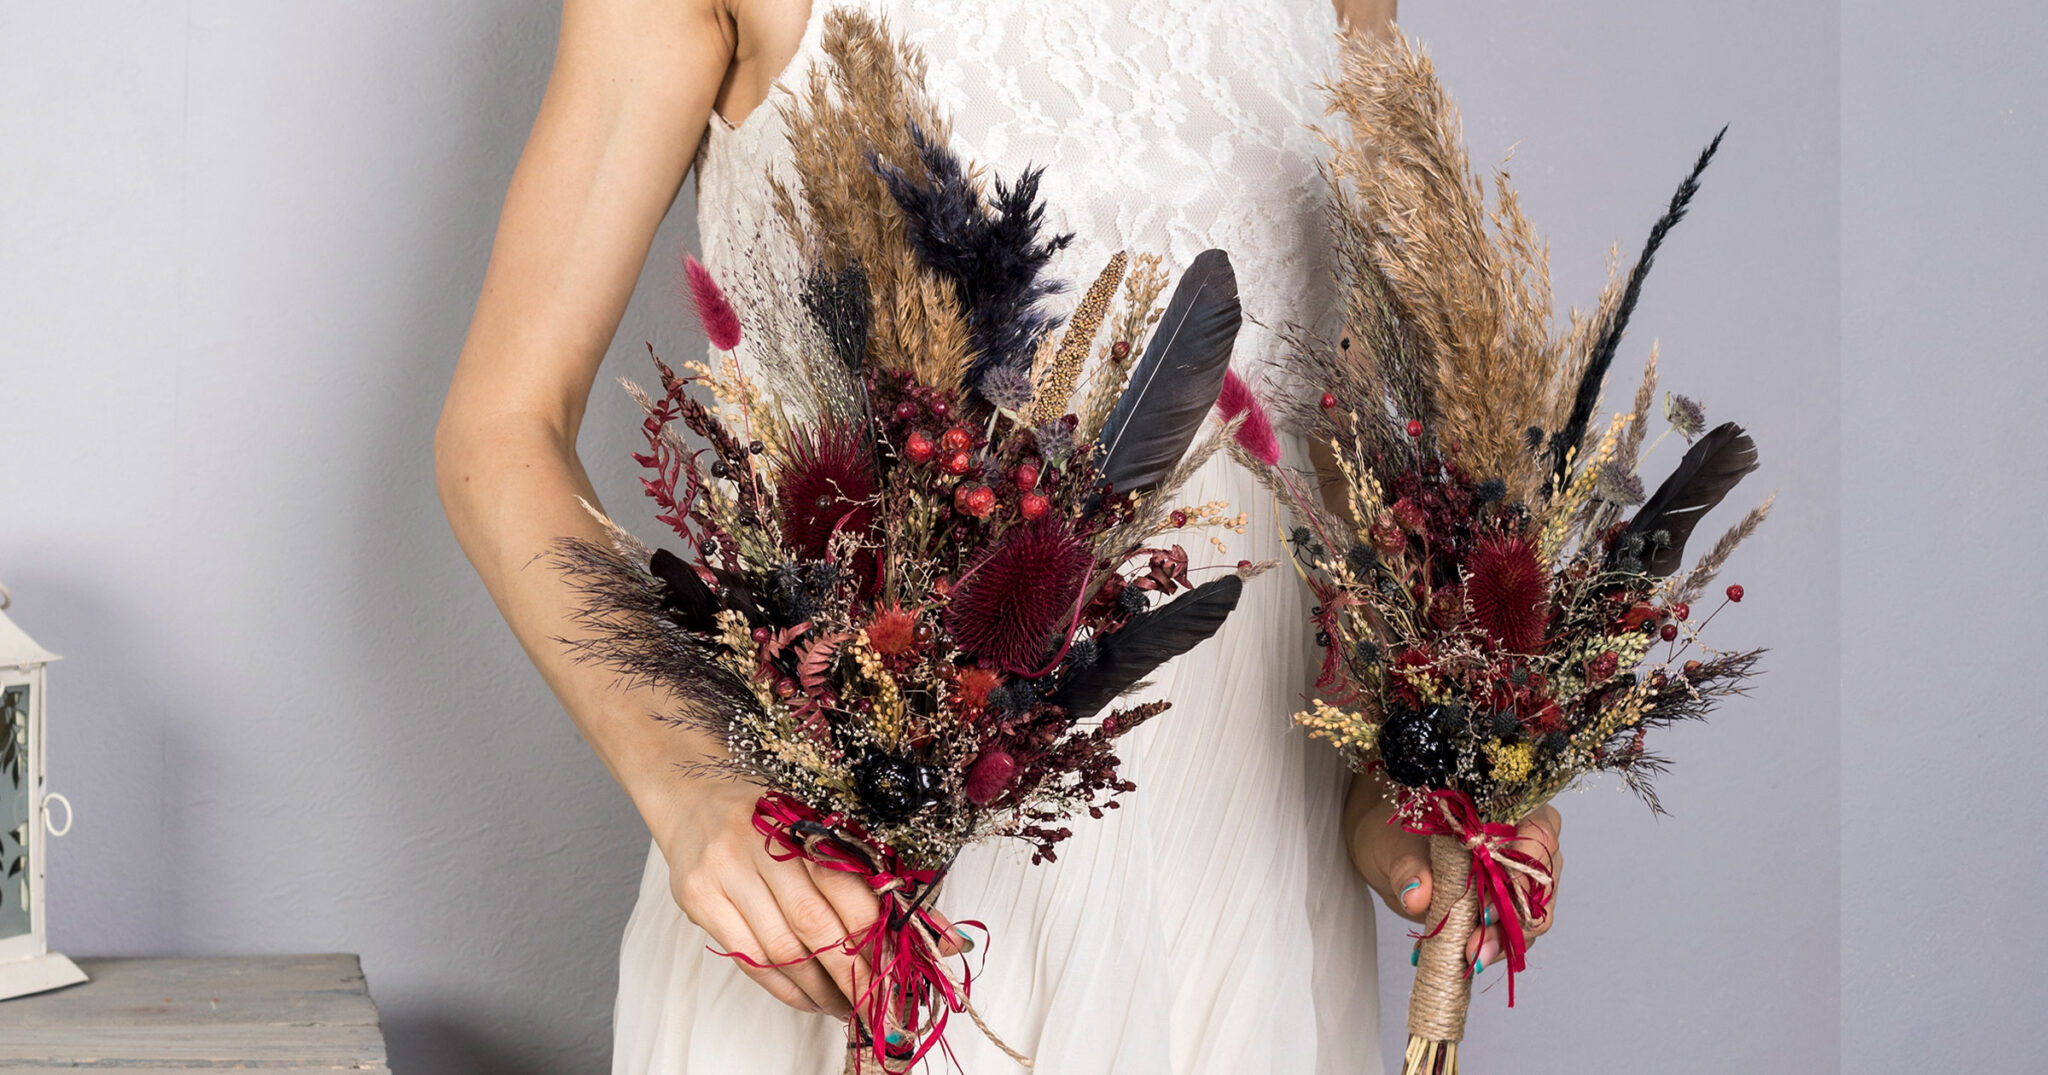 wedding-sets - fall-autumn-burgundy-black-gothic-pampas-grass-wedding-bouquet-with-teasel-thistle-dried-flowers-SET-2021-06